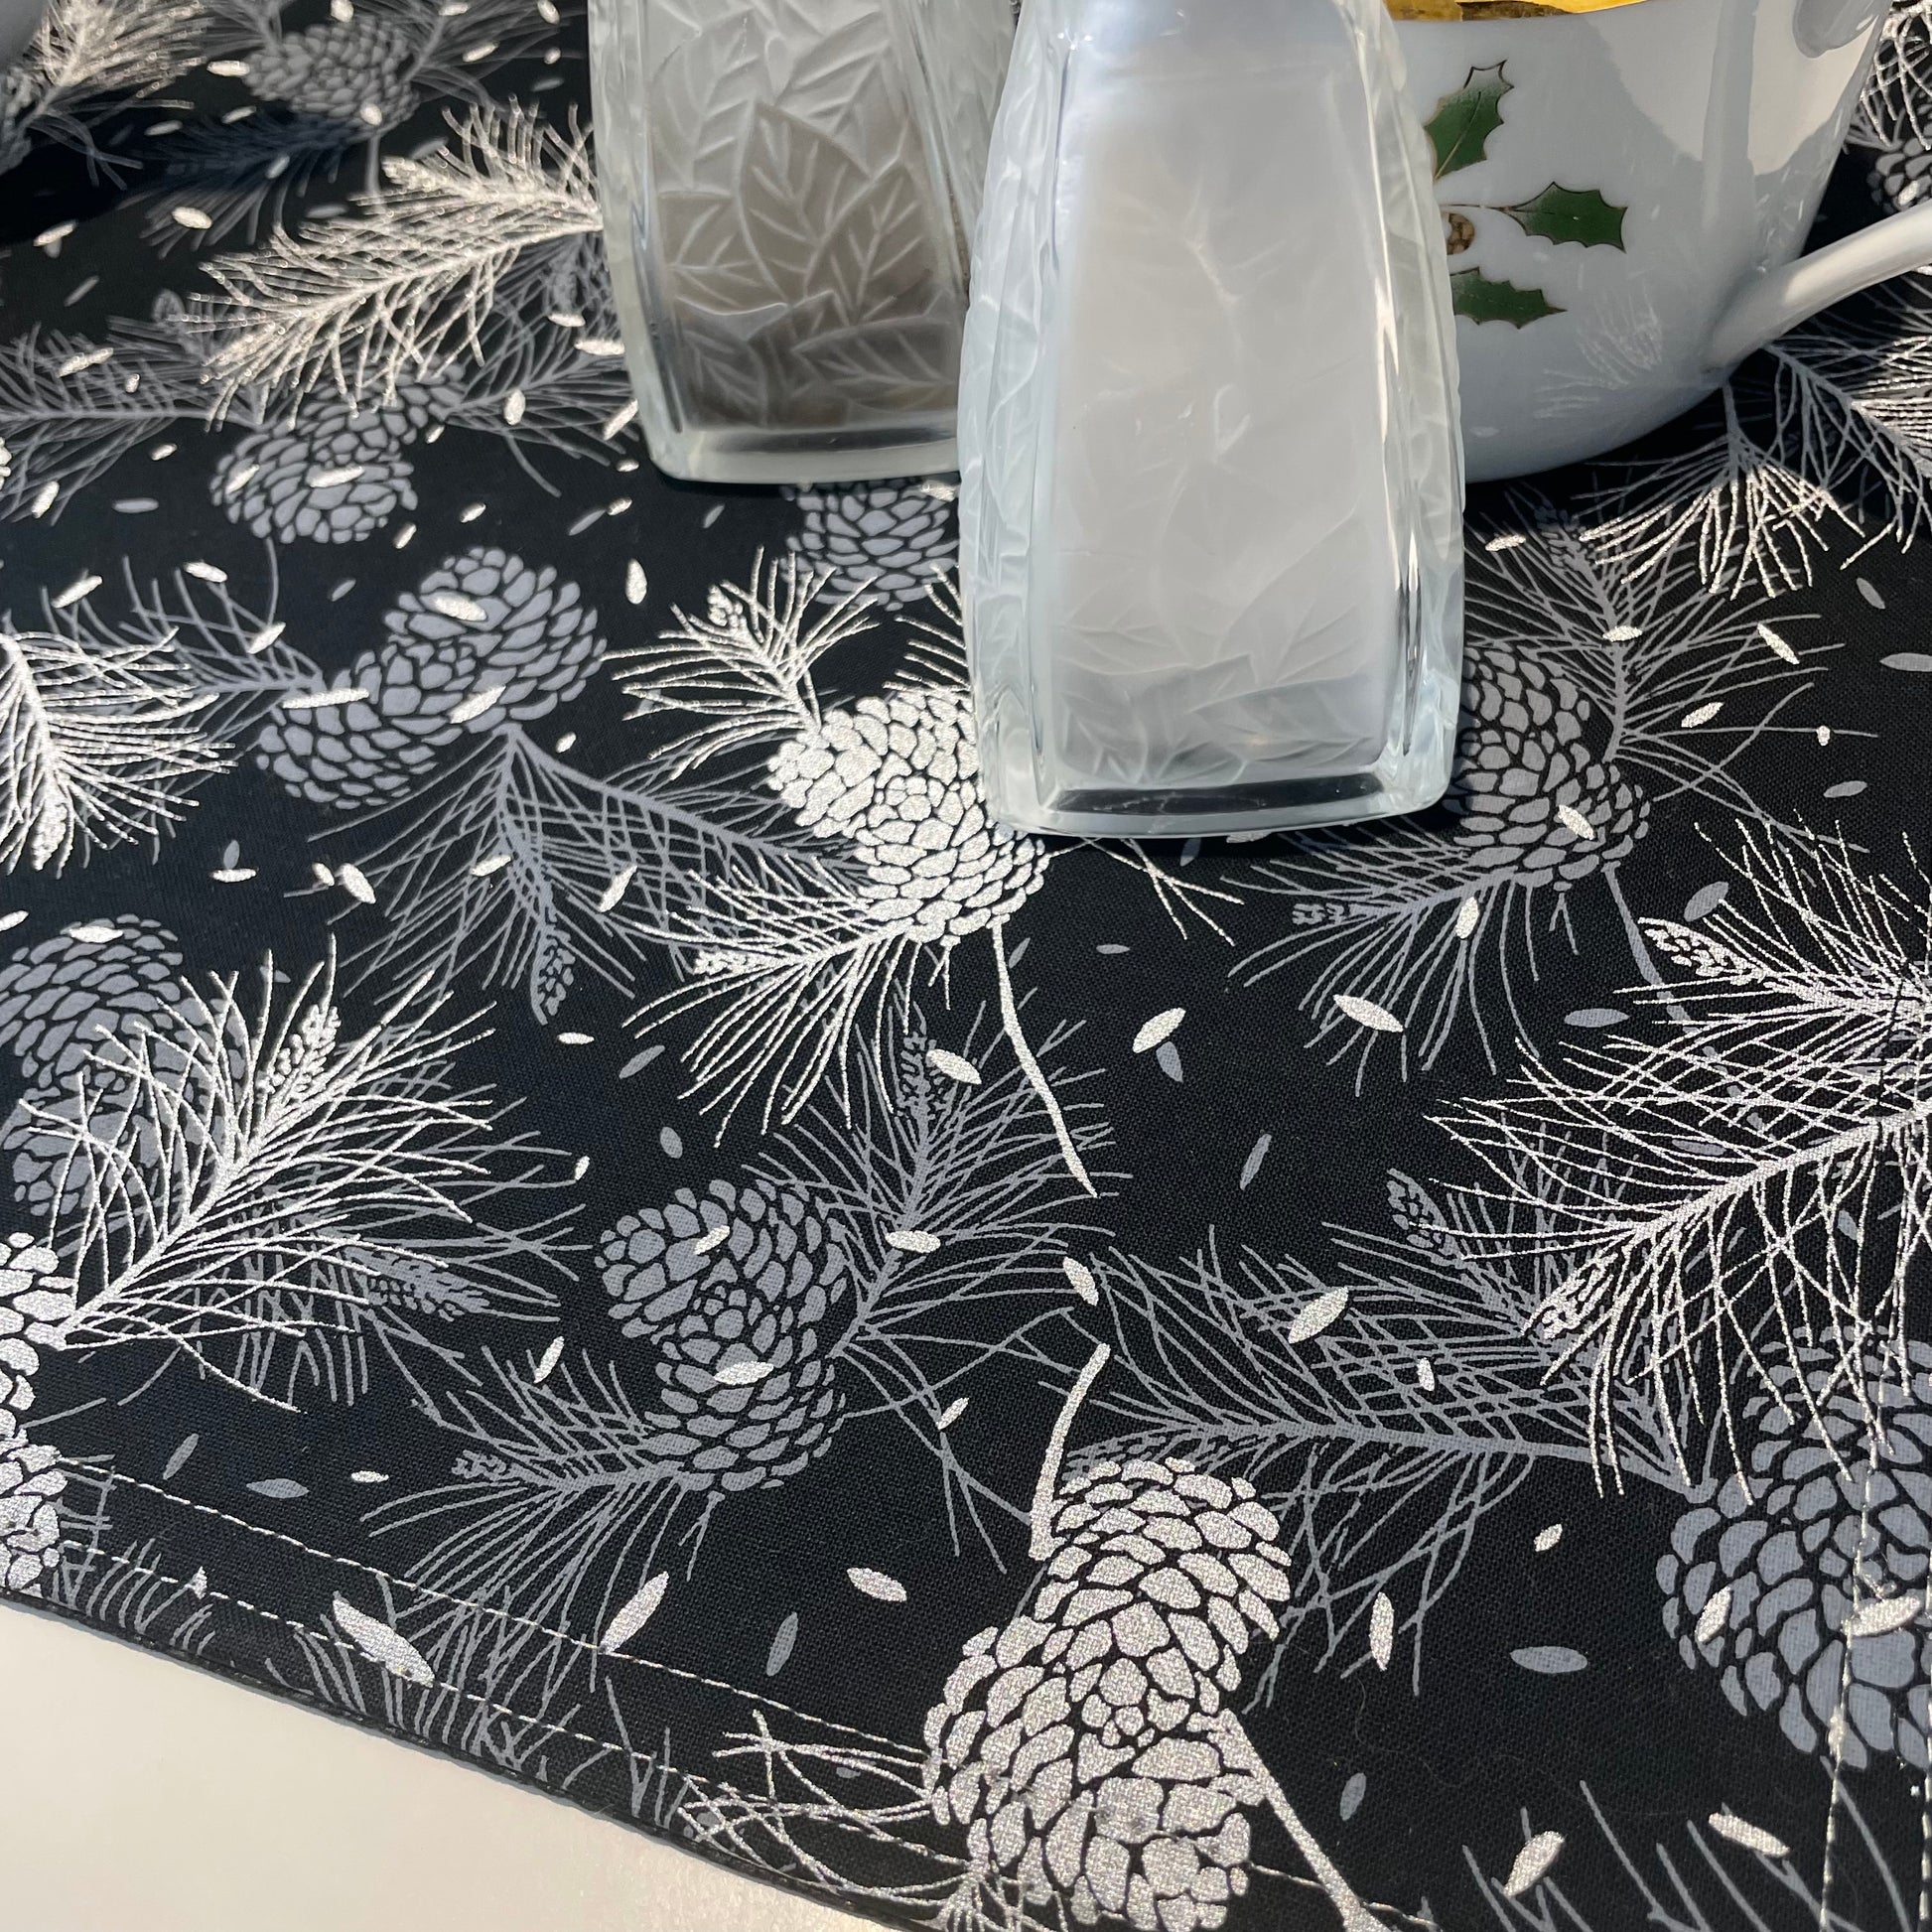 Silver and Black Pinecone Christmas Table Centerpiece, Reversible Table Centerpiece - Home Stitchery Decor